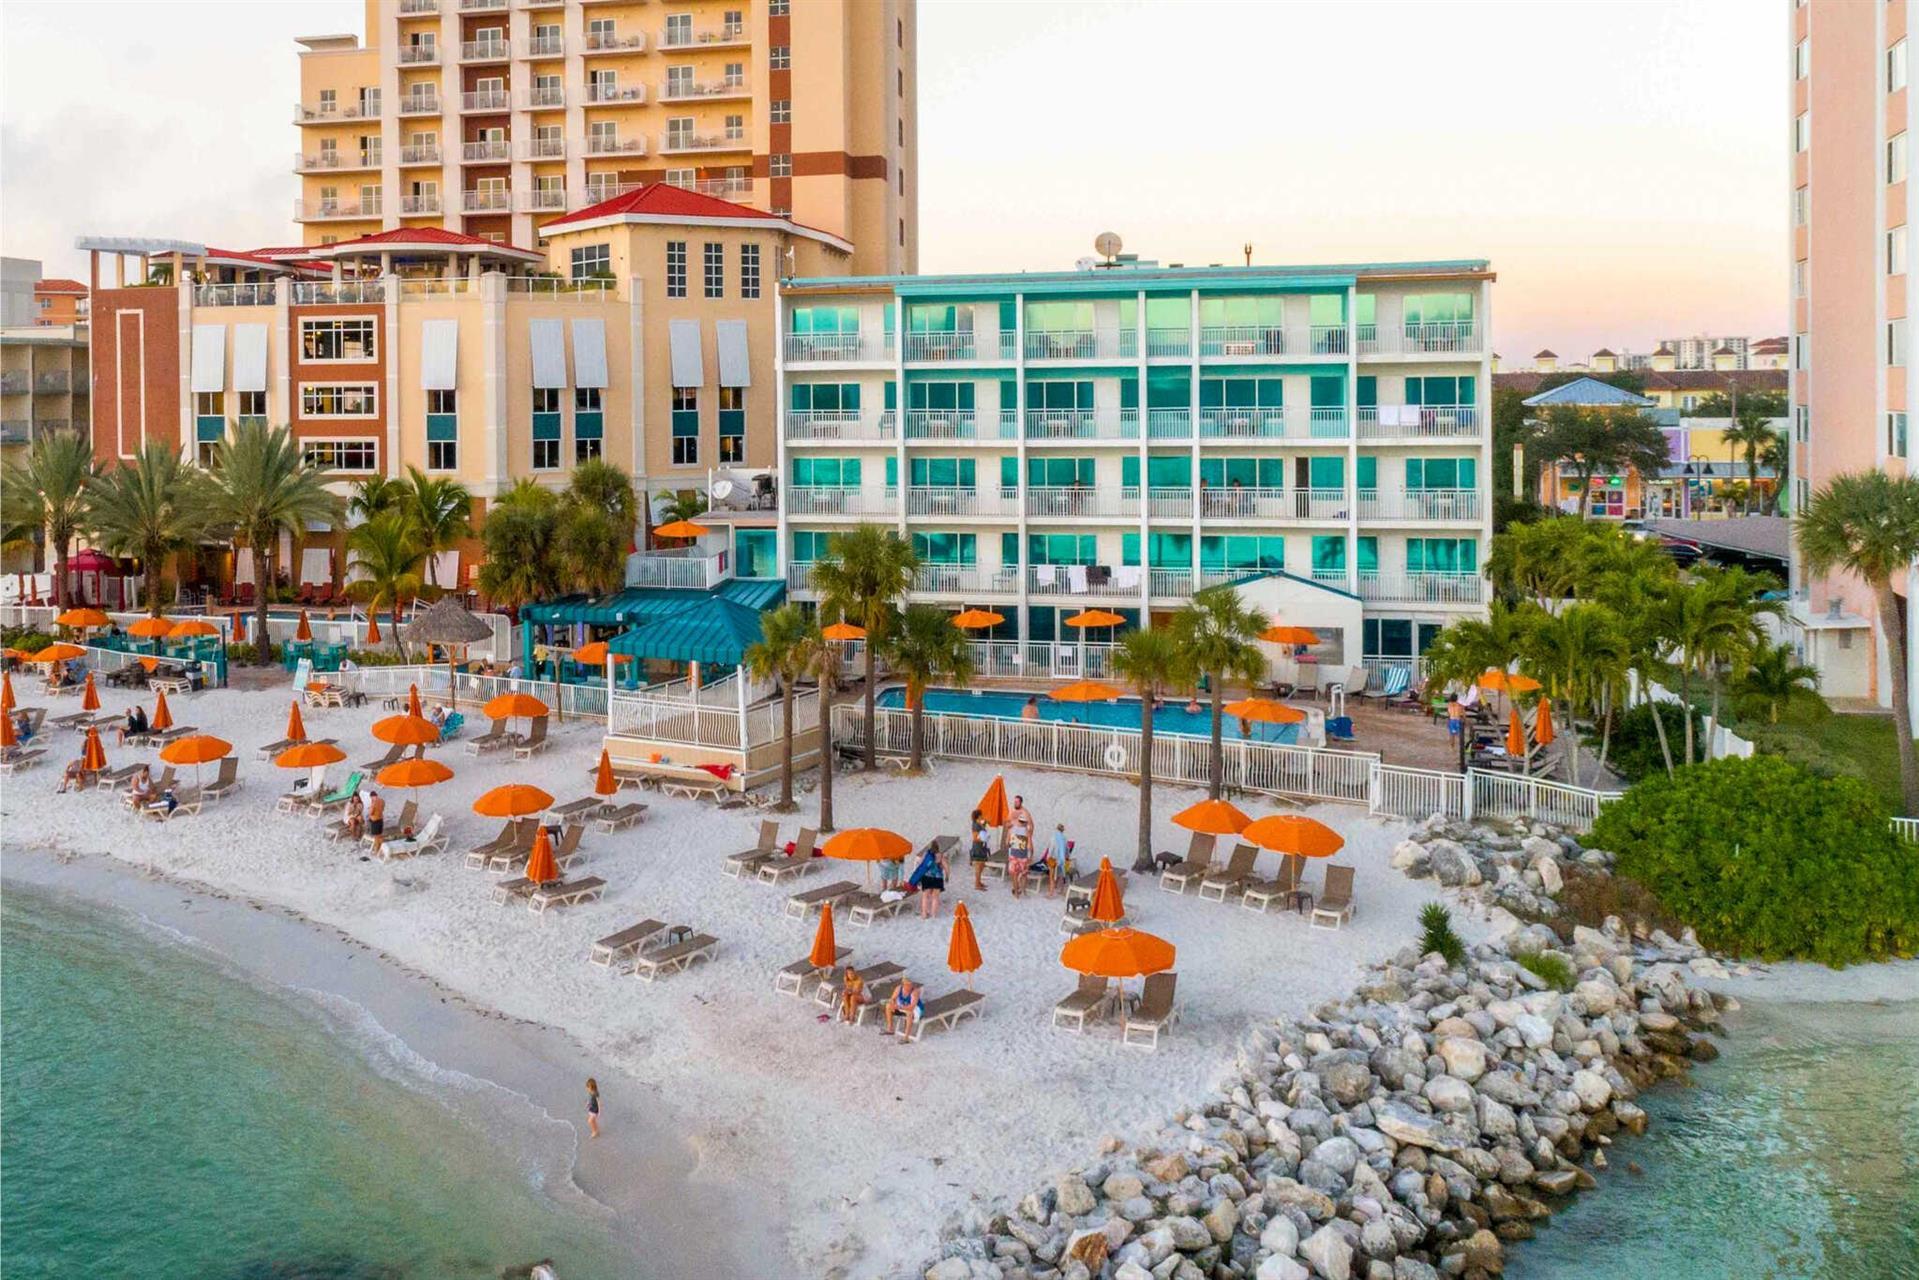 Winter The Dolphin's Beach Club, Ascend Hotel Collection in Clearwater Beach, FL